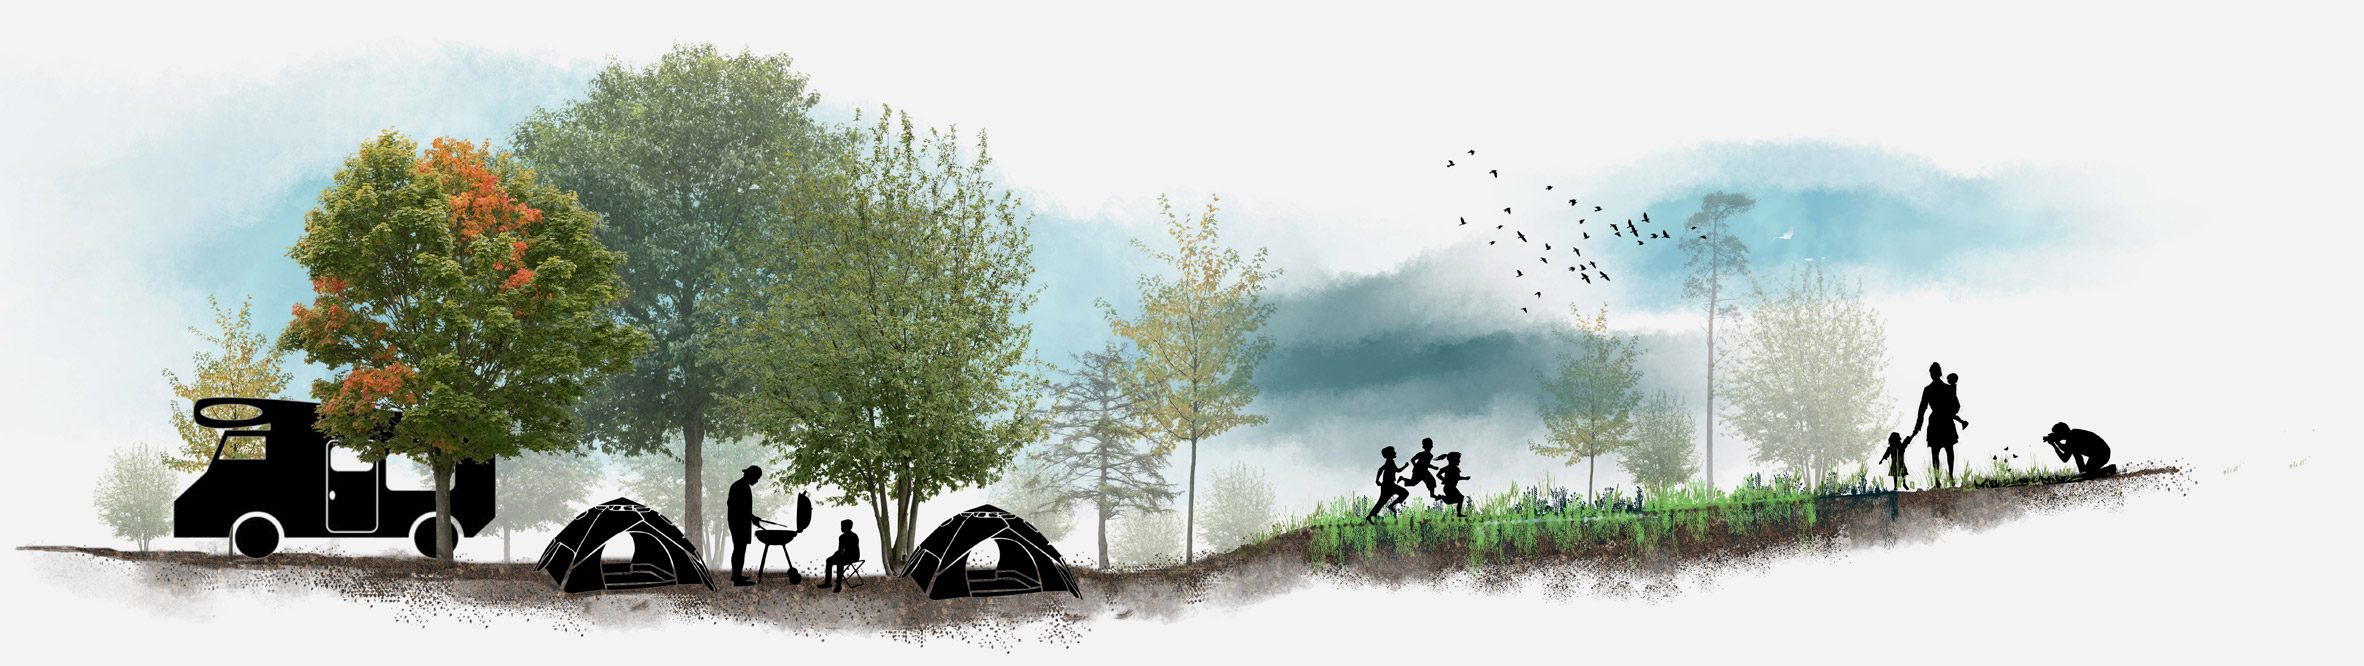 Visualisation of a campground with figures engaging in acitivities